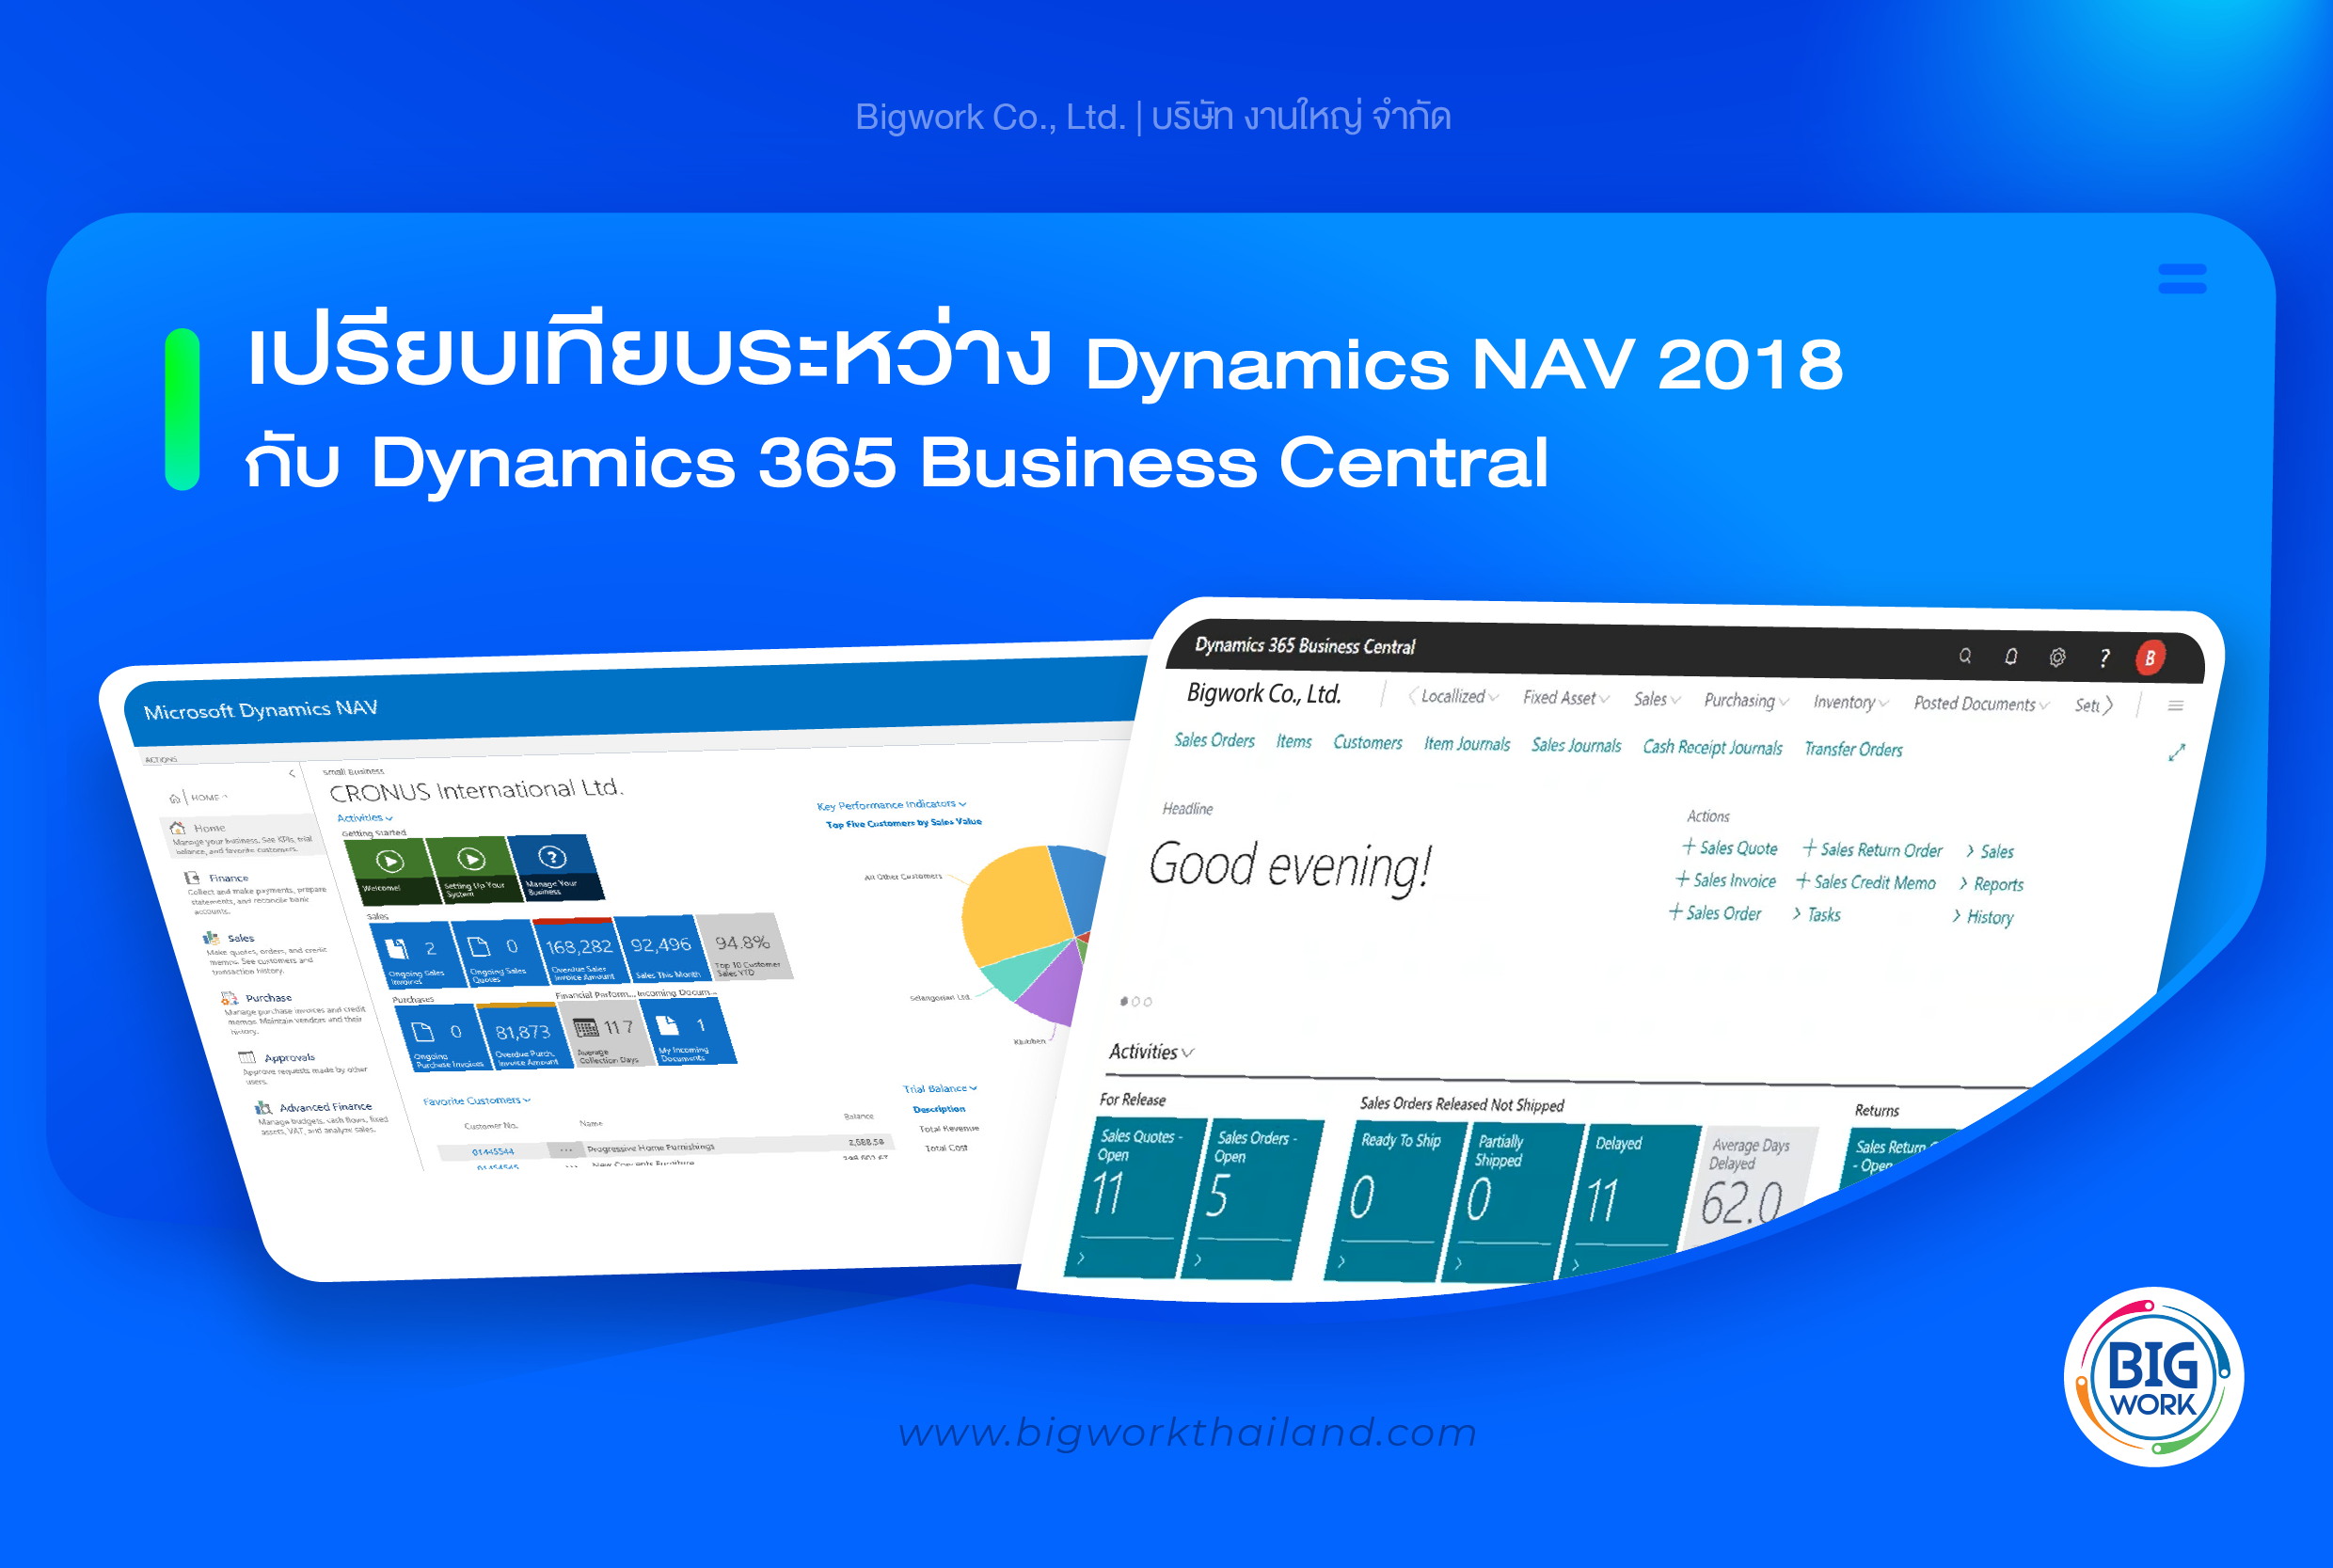 Compare The Versions From Nav 2018 Through To Dynamics 365